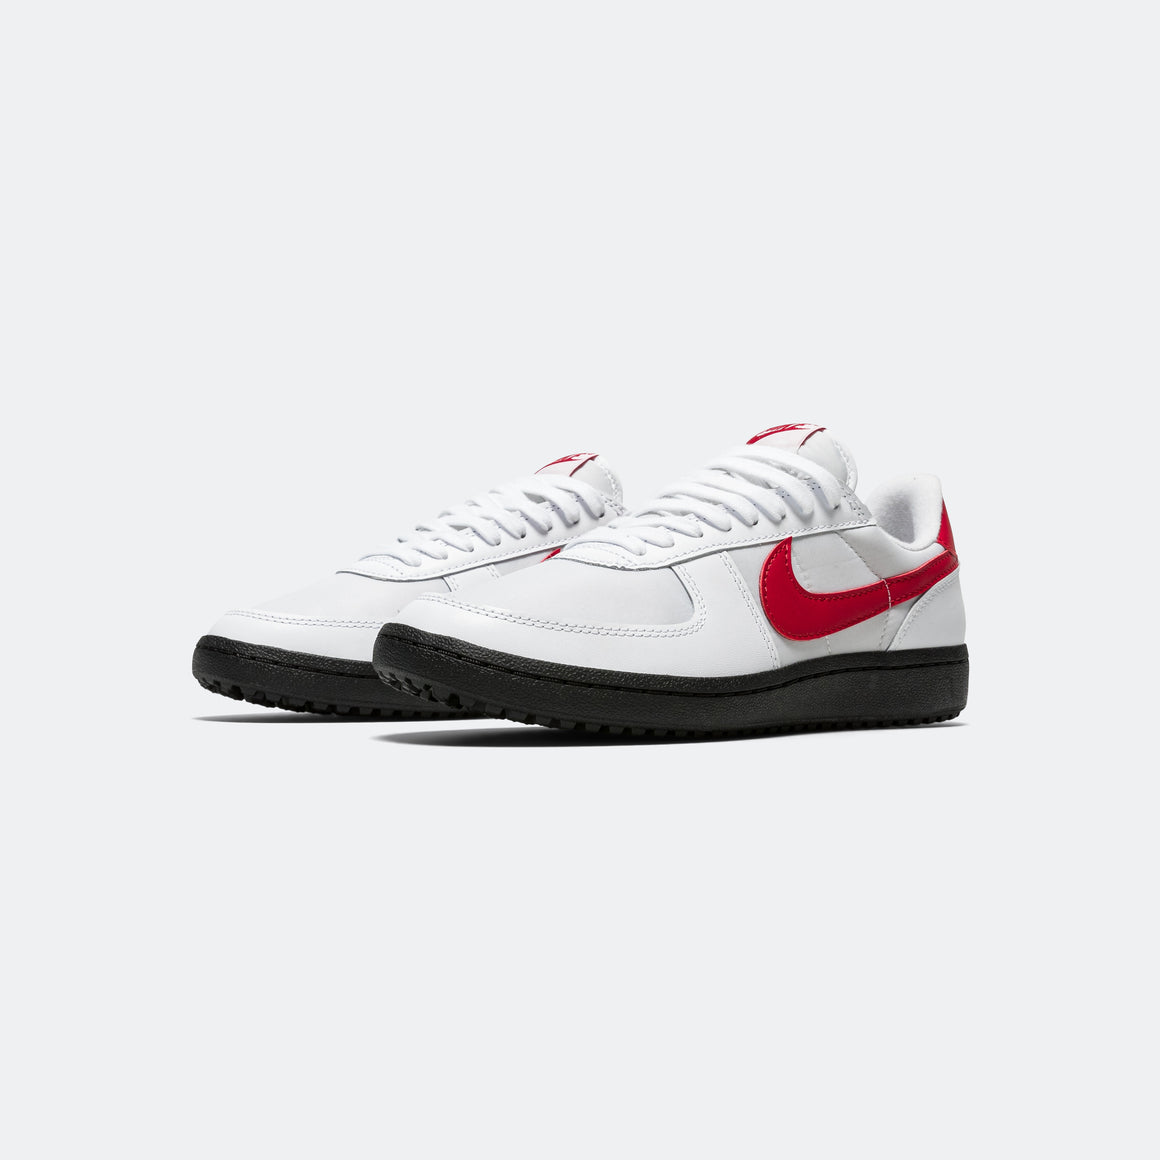 Nike - Field General 82 SP - White/Varsity Red-Black - UP THERE